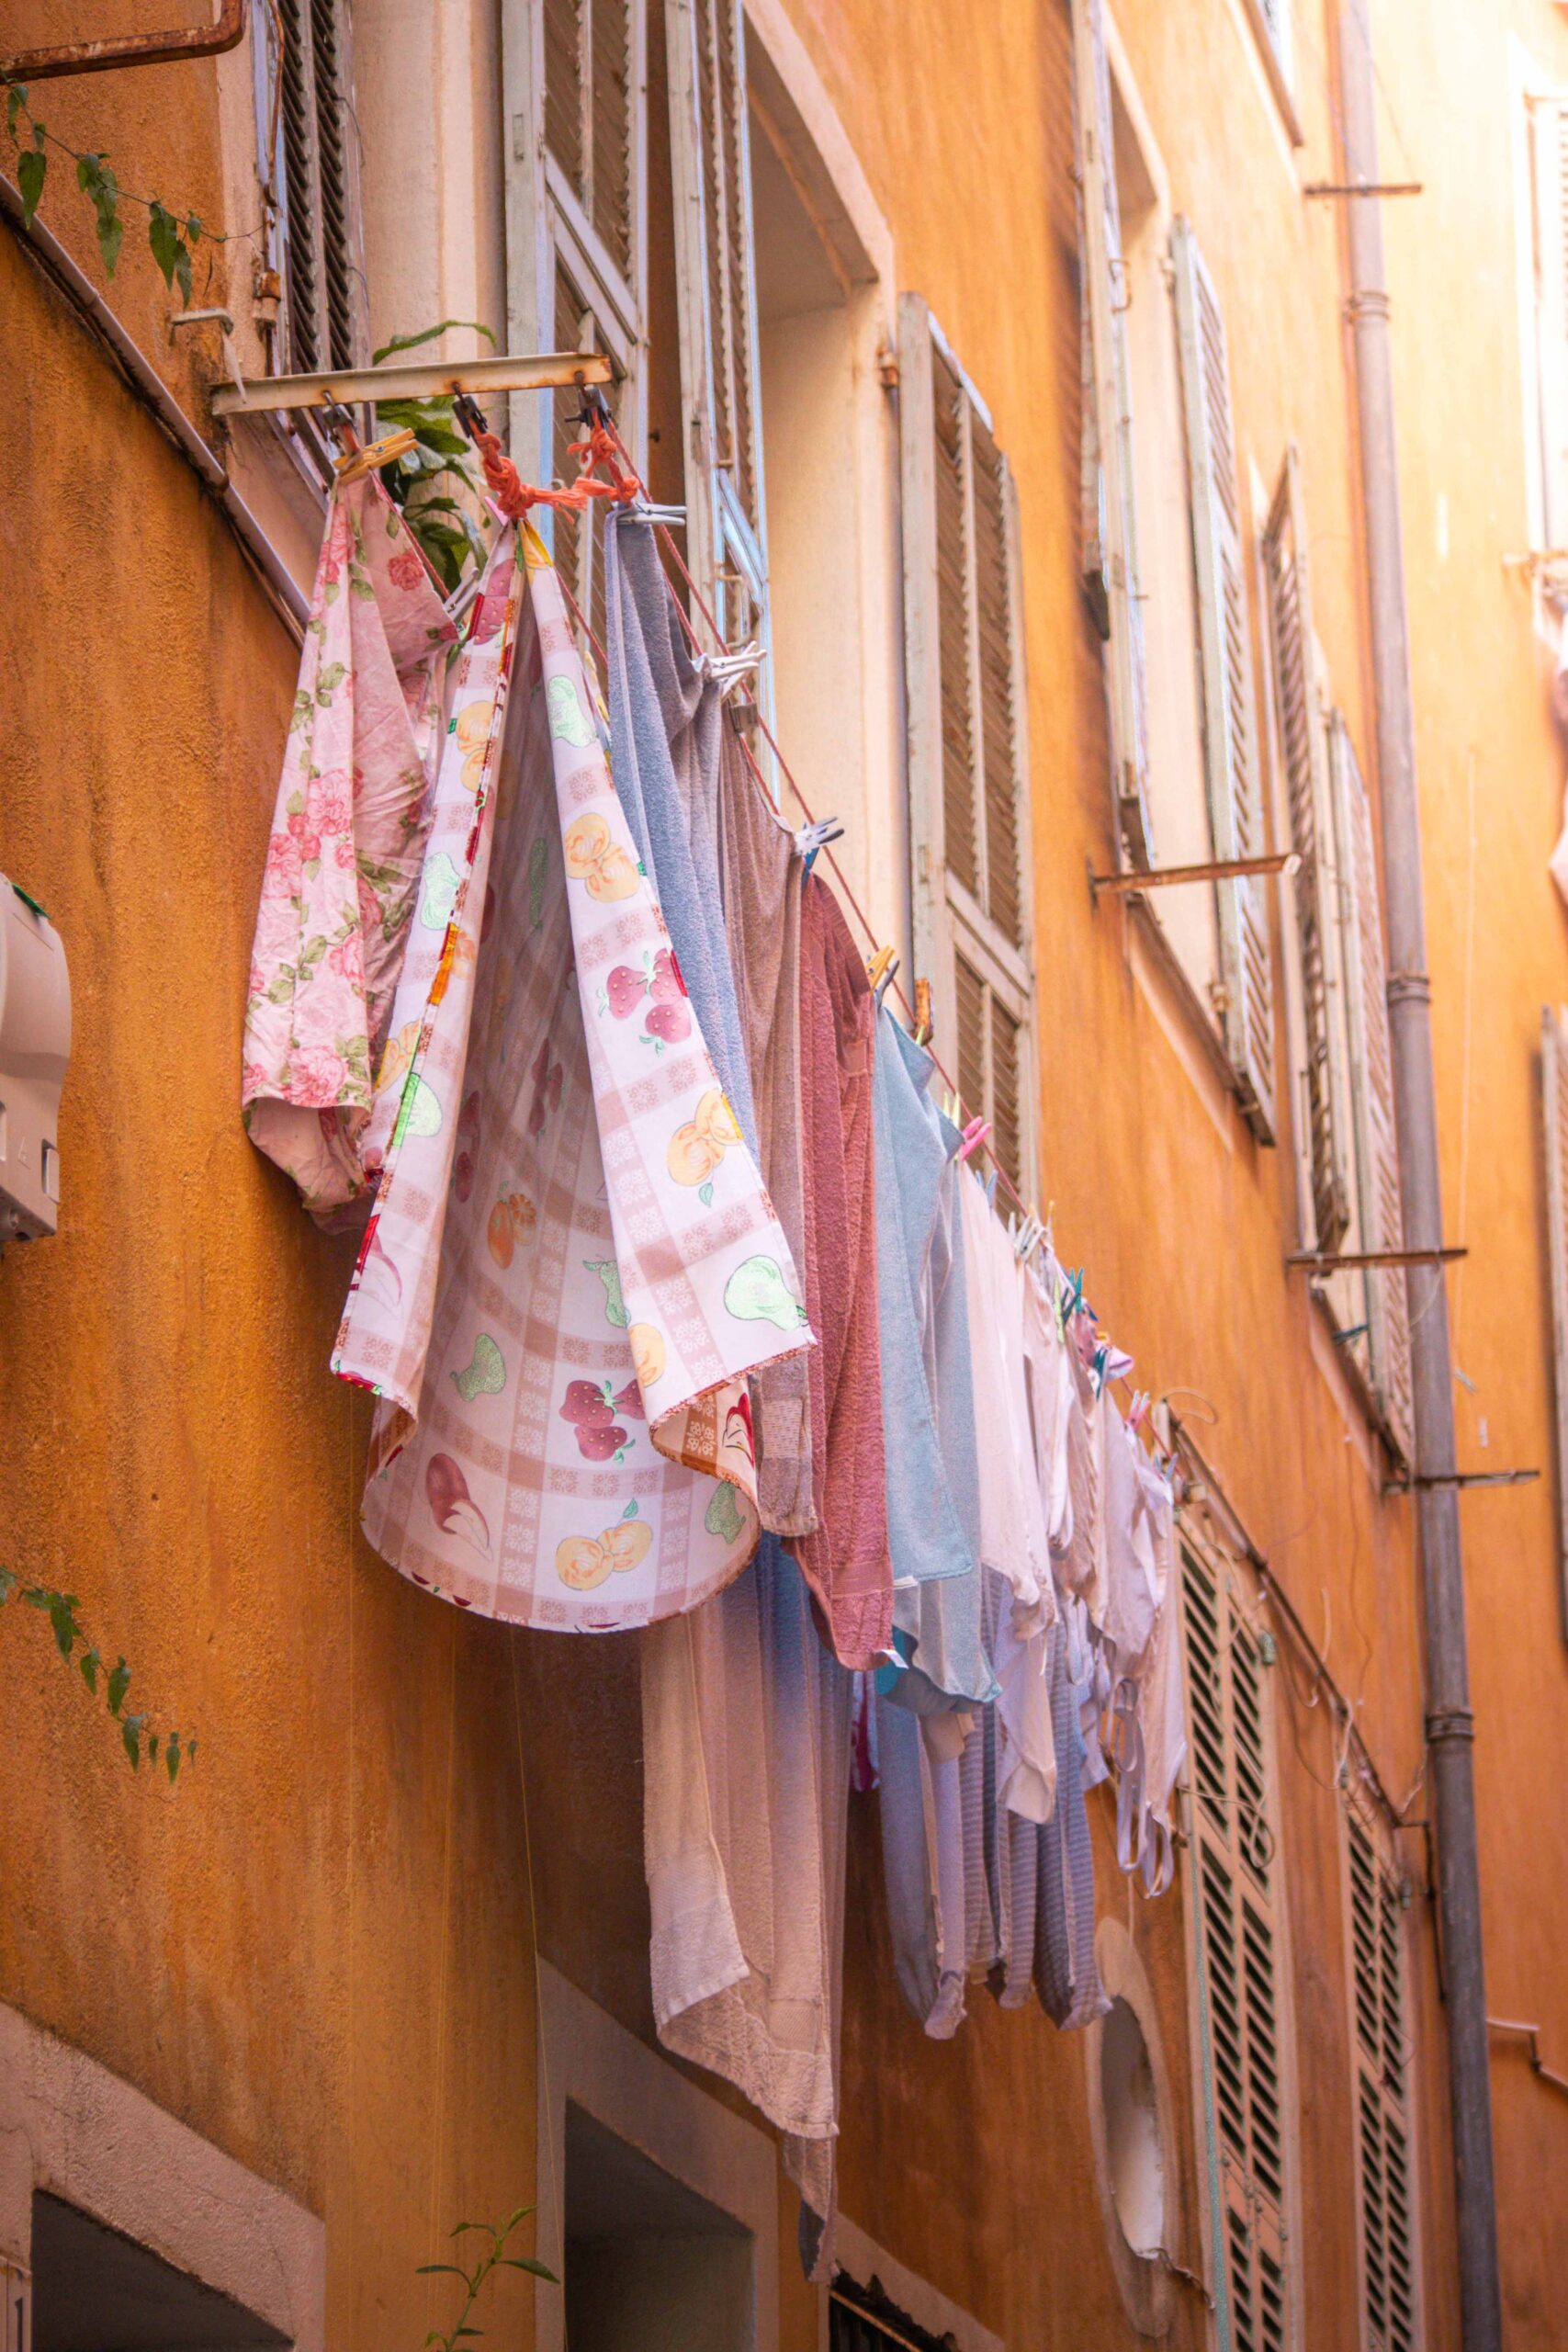 Hanging clothes drying on the balcony of colourful buildings with yellow and orange facades in the Old Town of Nice (Vieux-Nice) in Nice, France